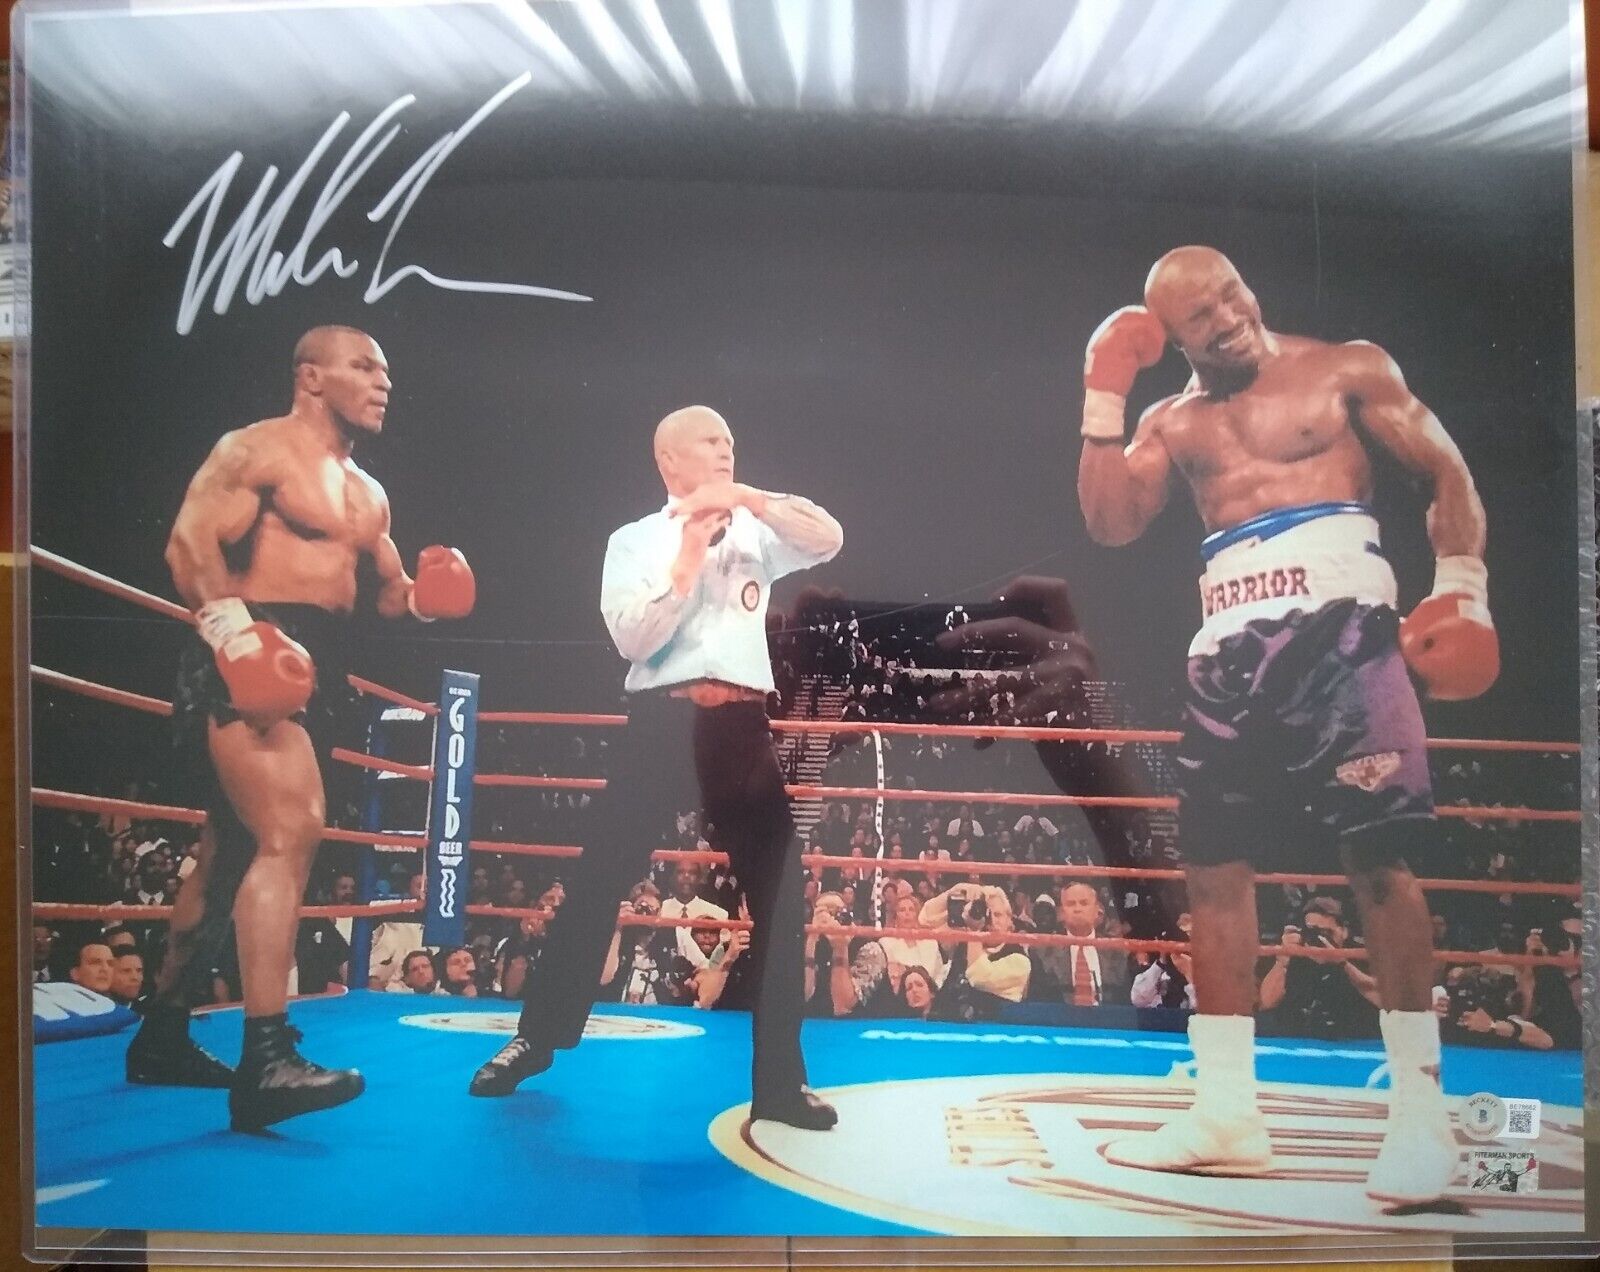 Mike Tyson Signed/autographed 16x20 Photo Holyfield Ear Bite Fight Beckett Coa